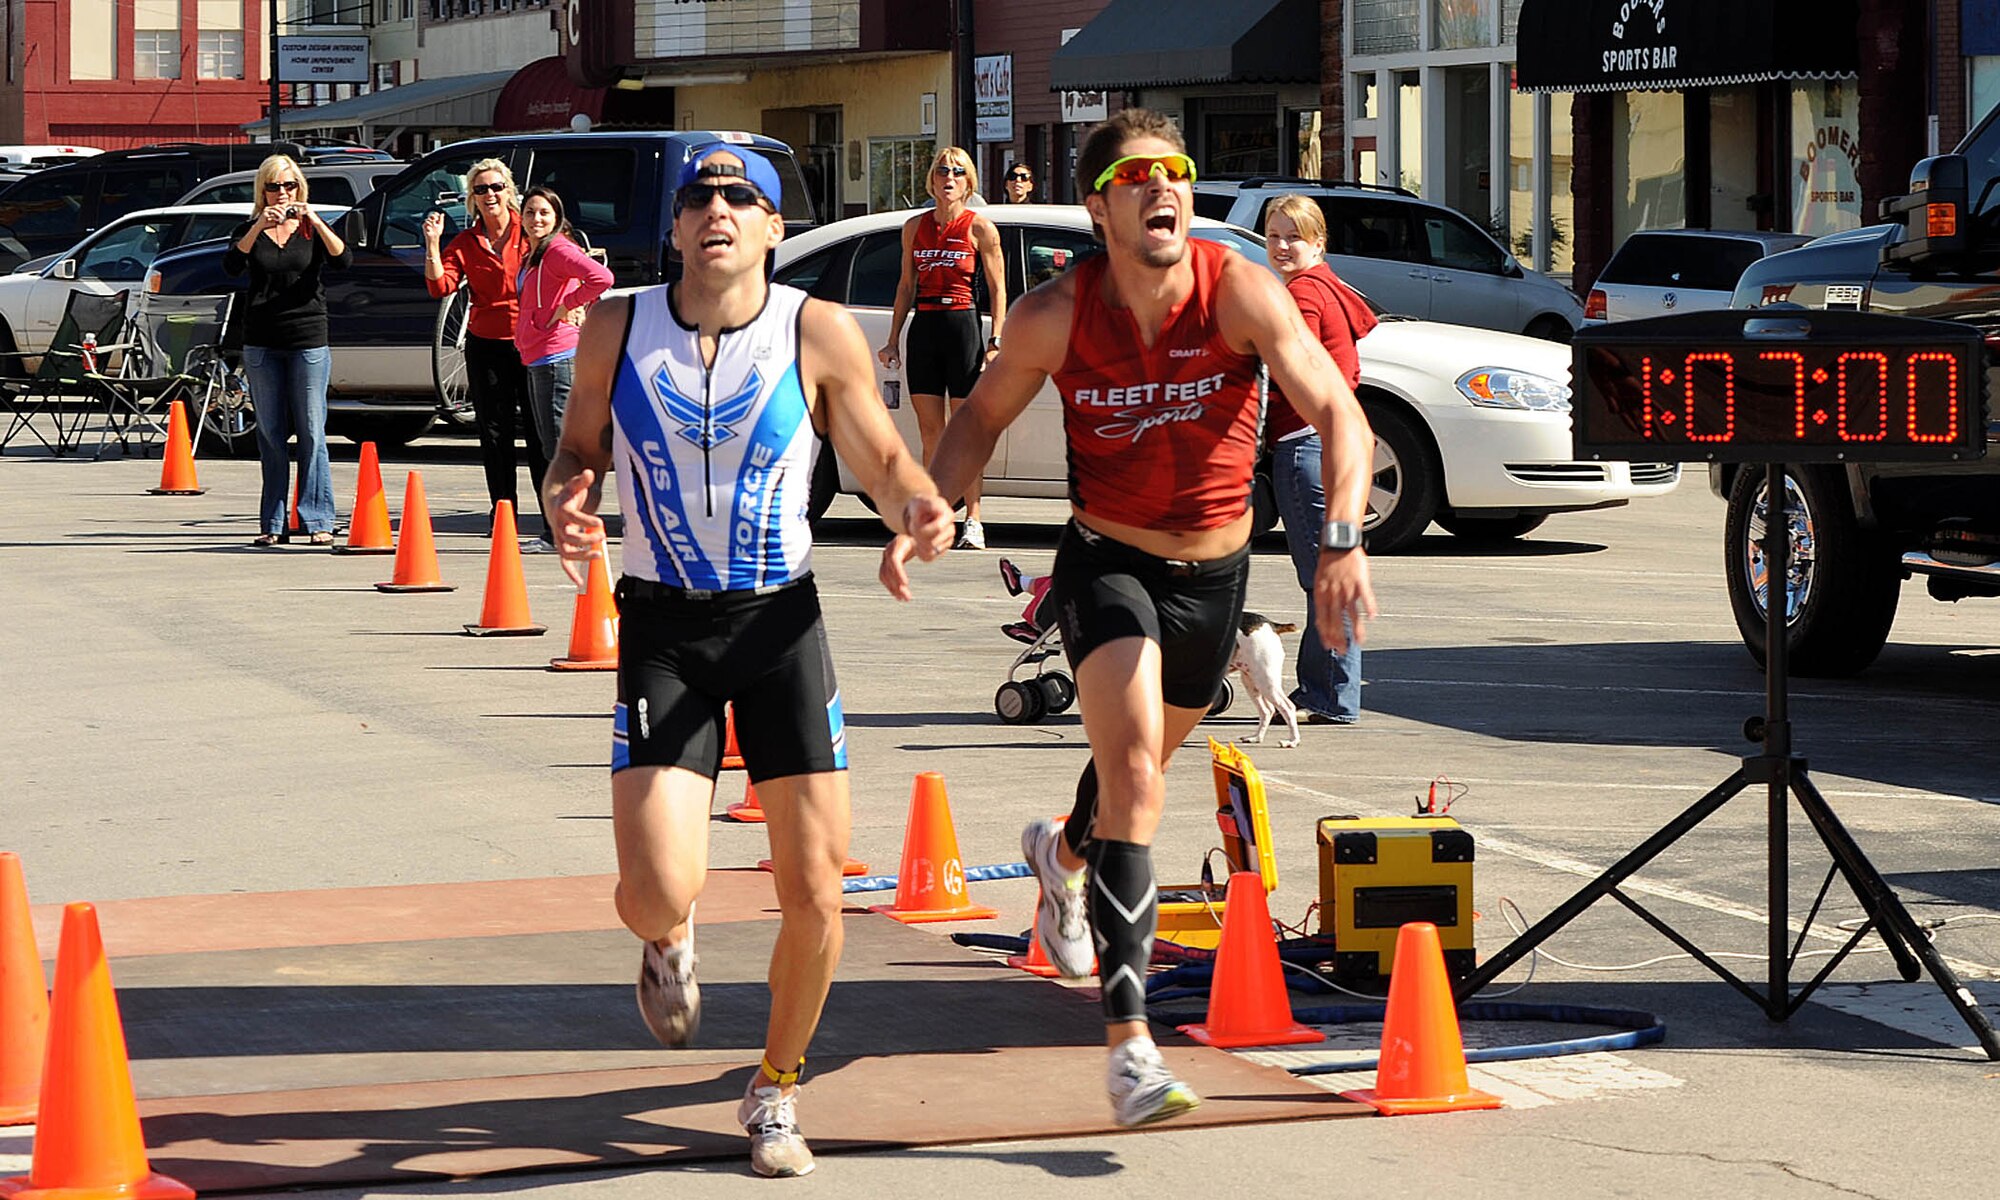 John Dalrymple, left, crosses the finish line at the Fall Classic Duathlon in Purcell just half a second before the second-place finisher. The air battle manager with the 963rd Airborne Air Control Squadron is currently training to compete in the Route 66 Triathlon in El Reno in June. (Courtesy photo)